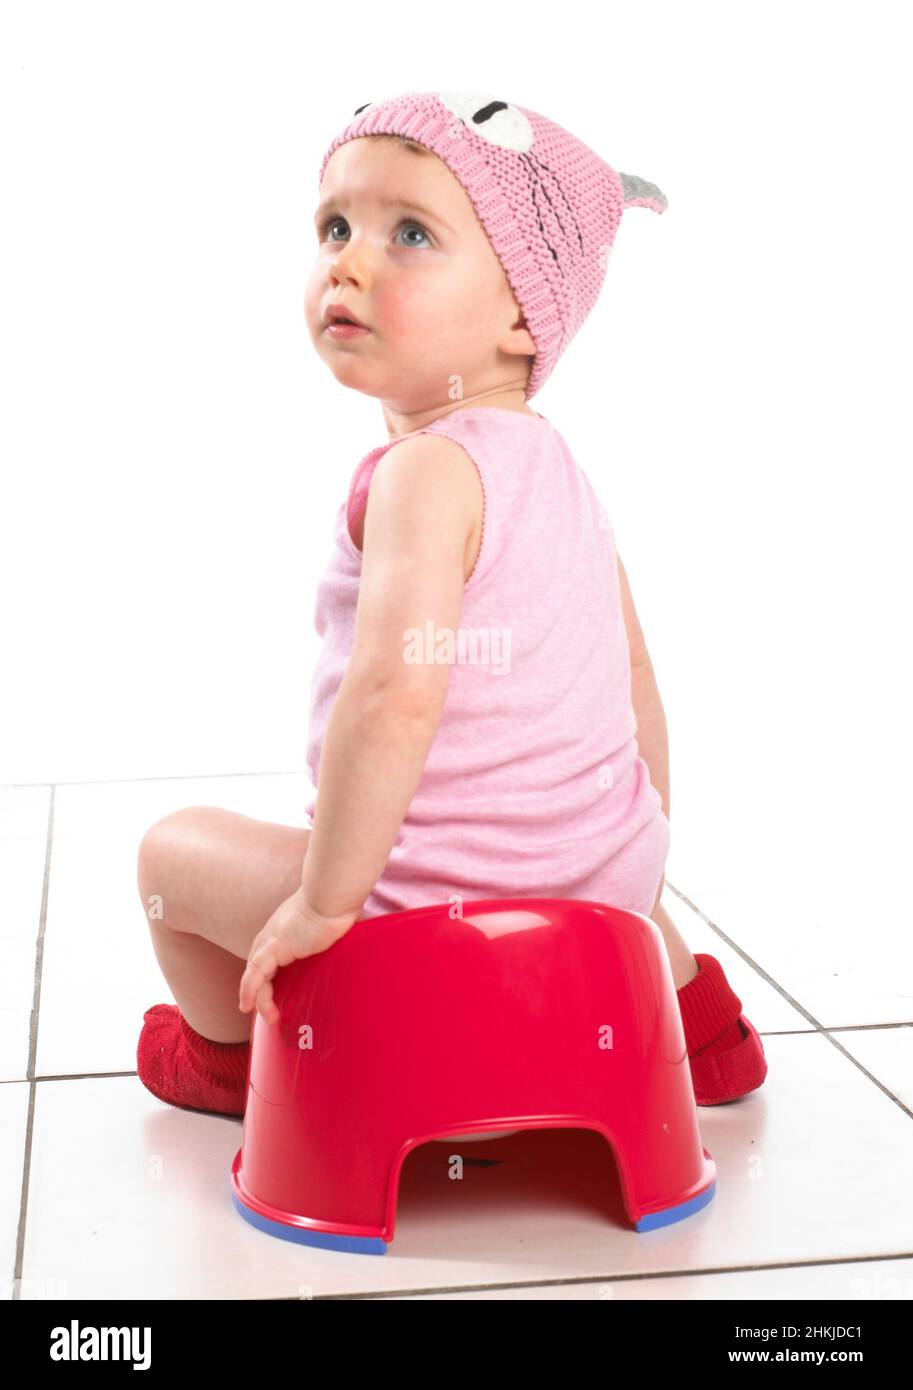 Girl sat on red potty looking behind her Stock Photo - Alamy